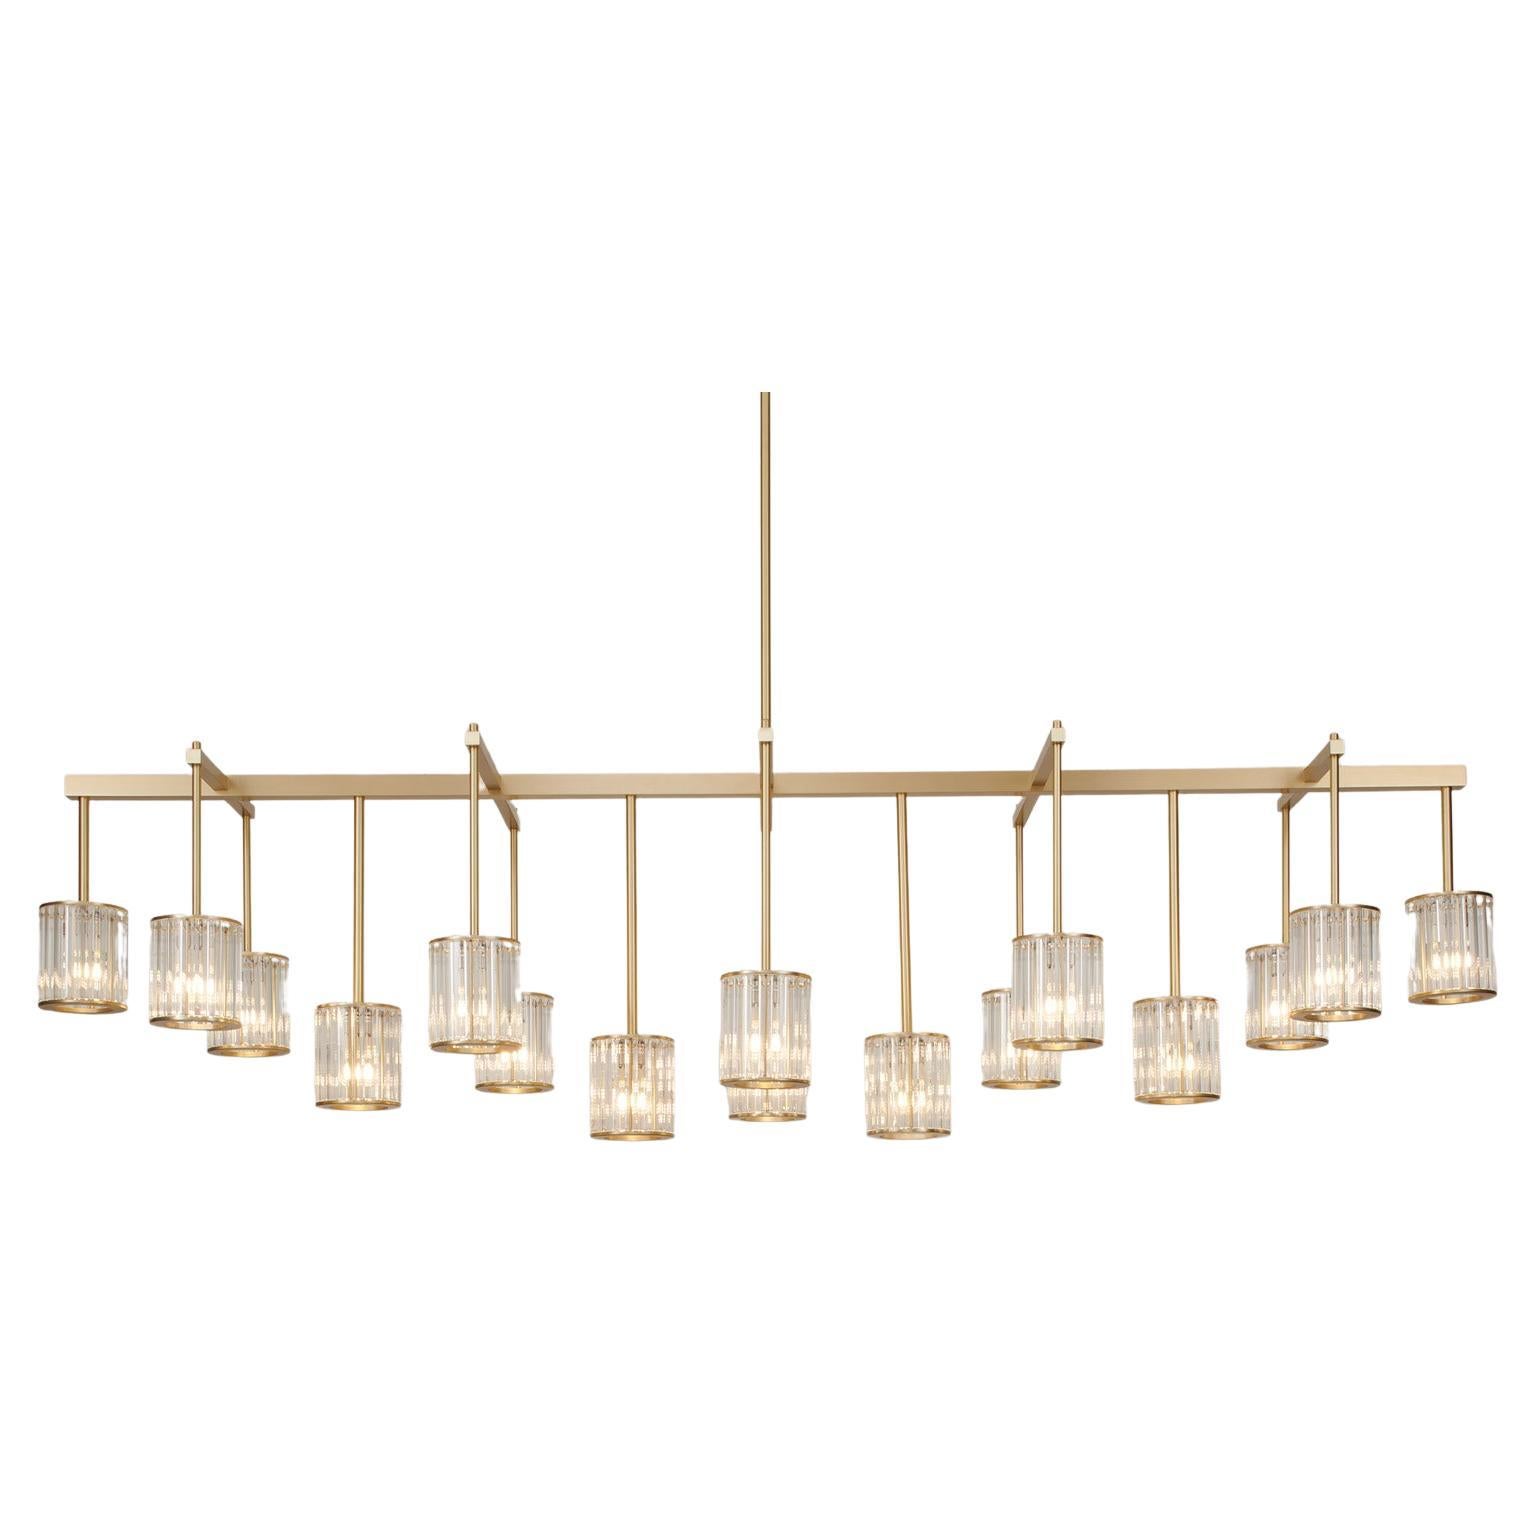 Flute Beam Chandelier with 16 Arms in Brushed Brass and Clear Glass Diffusers For Sale